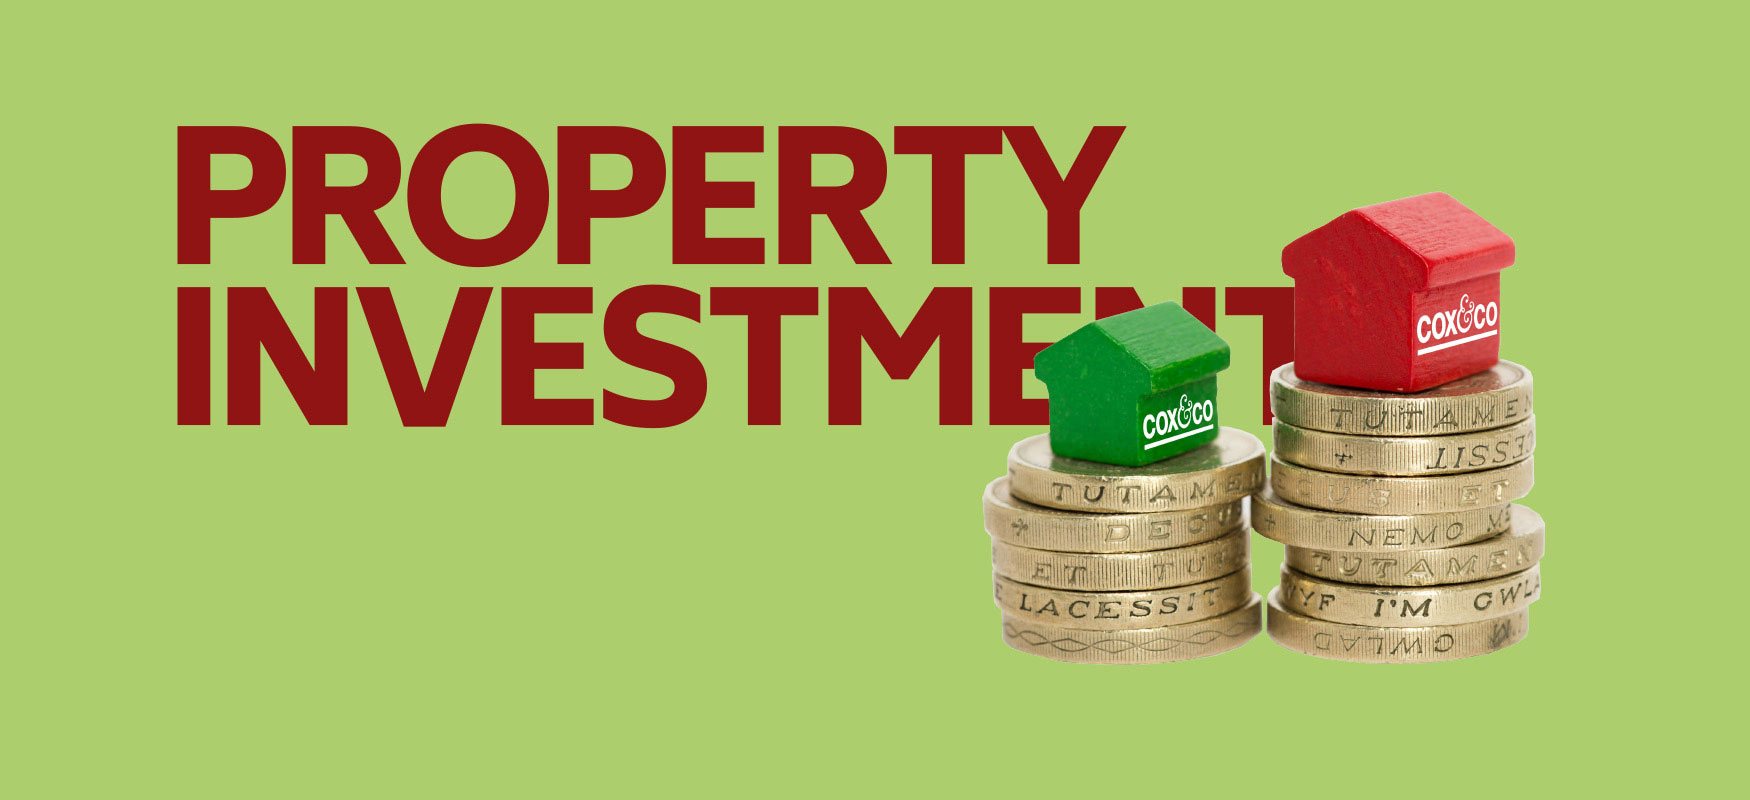 Property investment banner